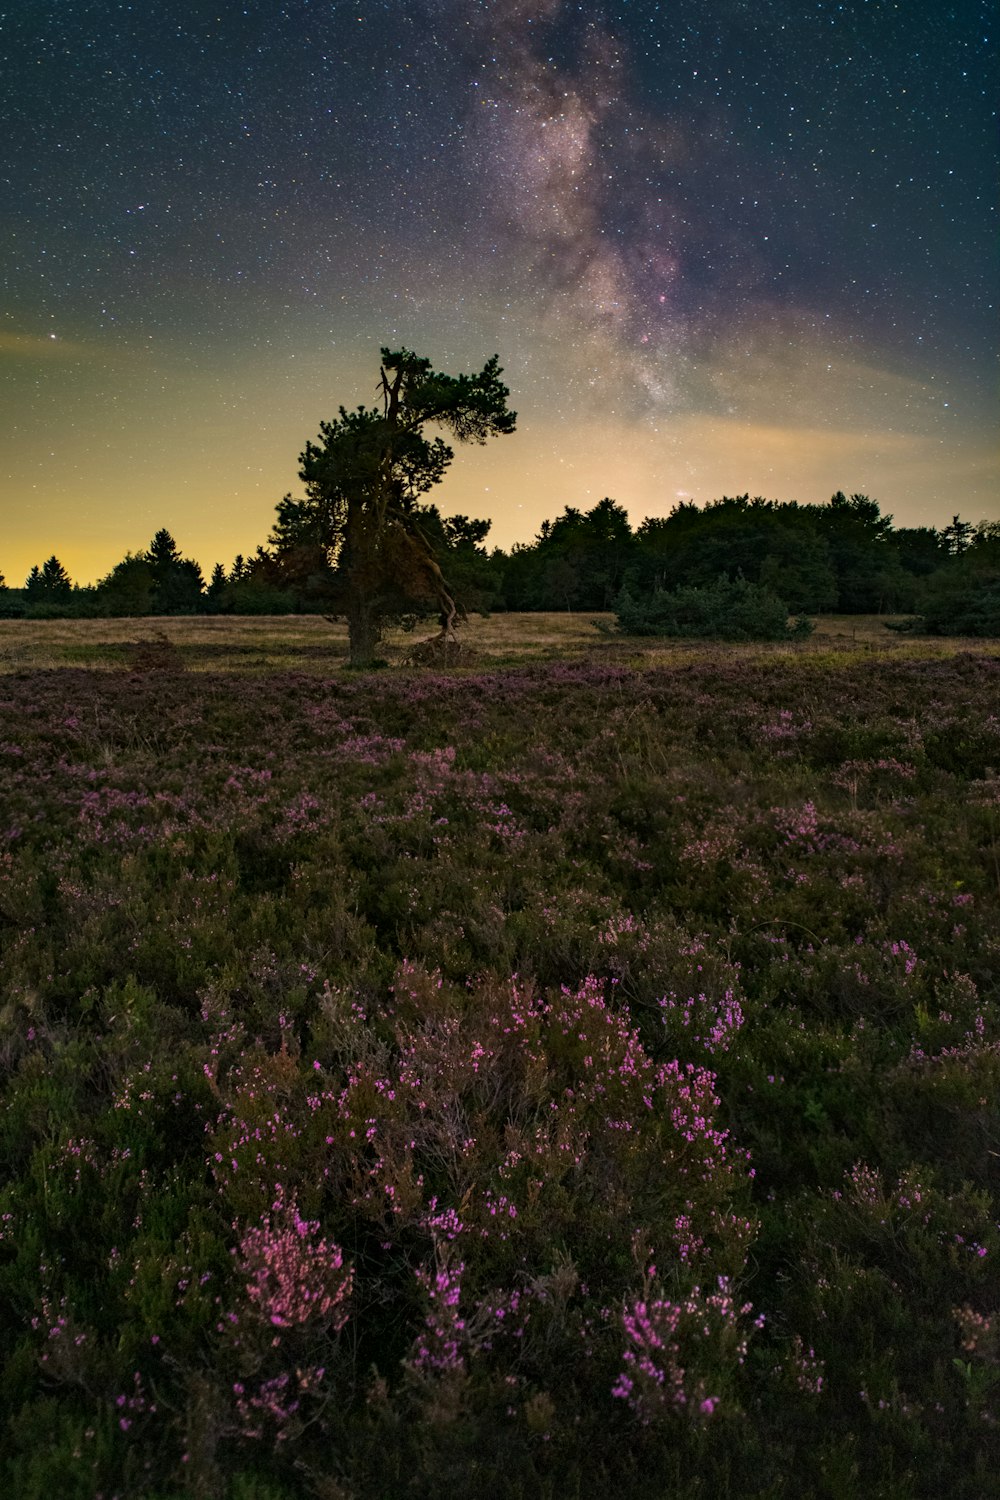 a field with purple flowers and a tree under a night sky